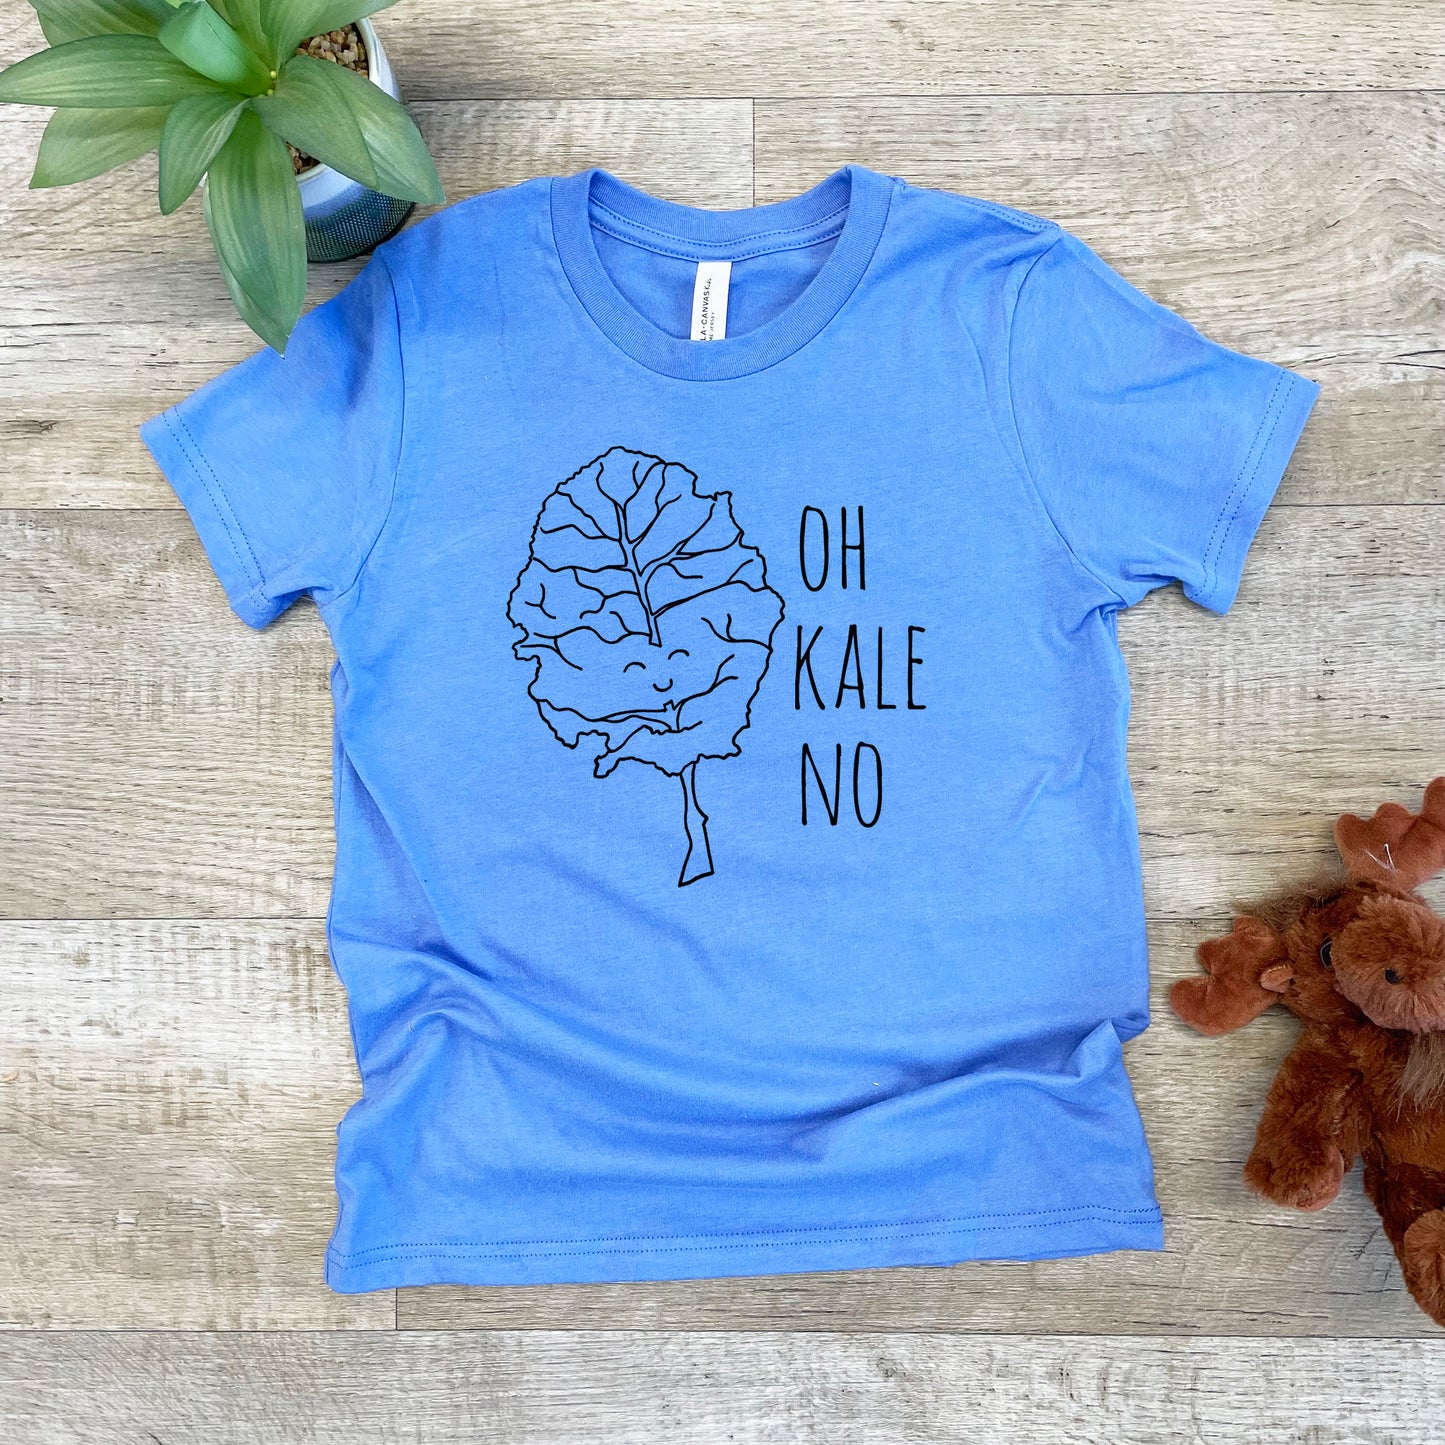 Oh Kale No - Kid's Tee - Columbia Blue or Lavender